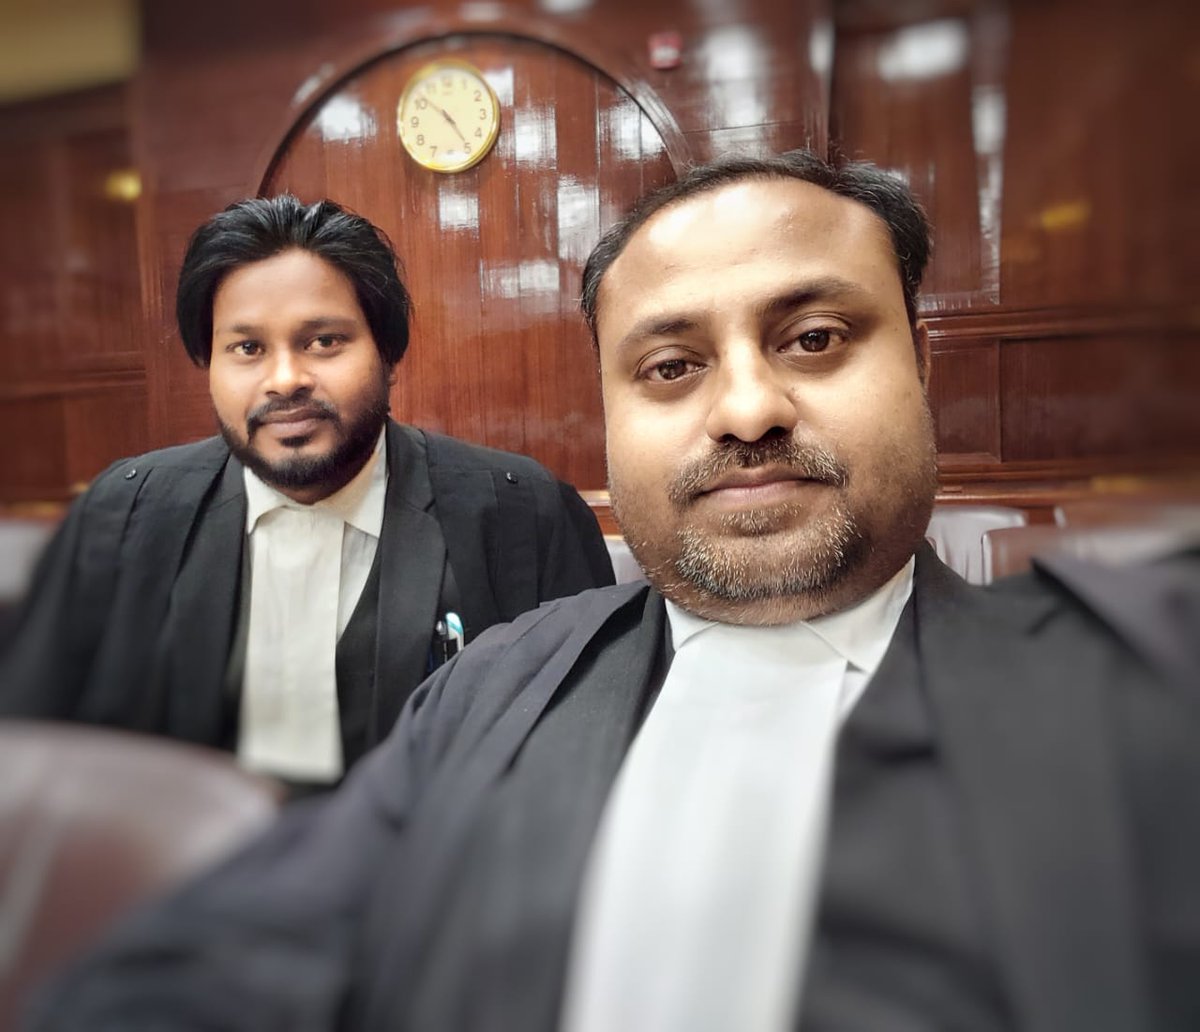 If you really want to do something, you'll find a way. If you don't, you'll find an excuse. #High_Court_Lucknow #goovibes